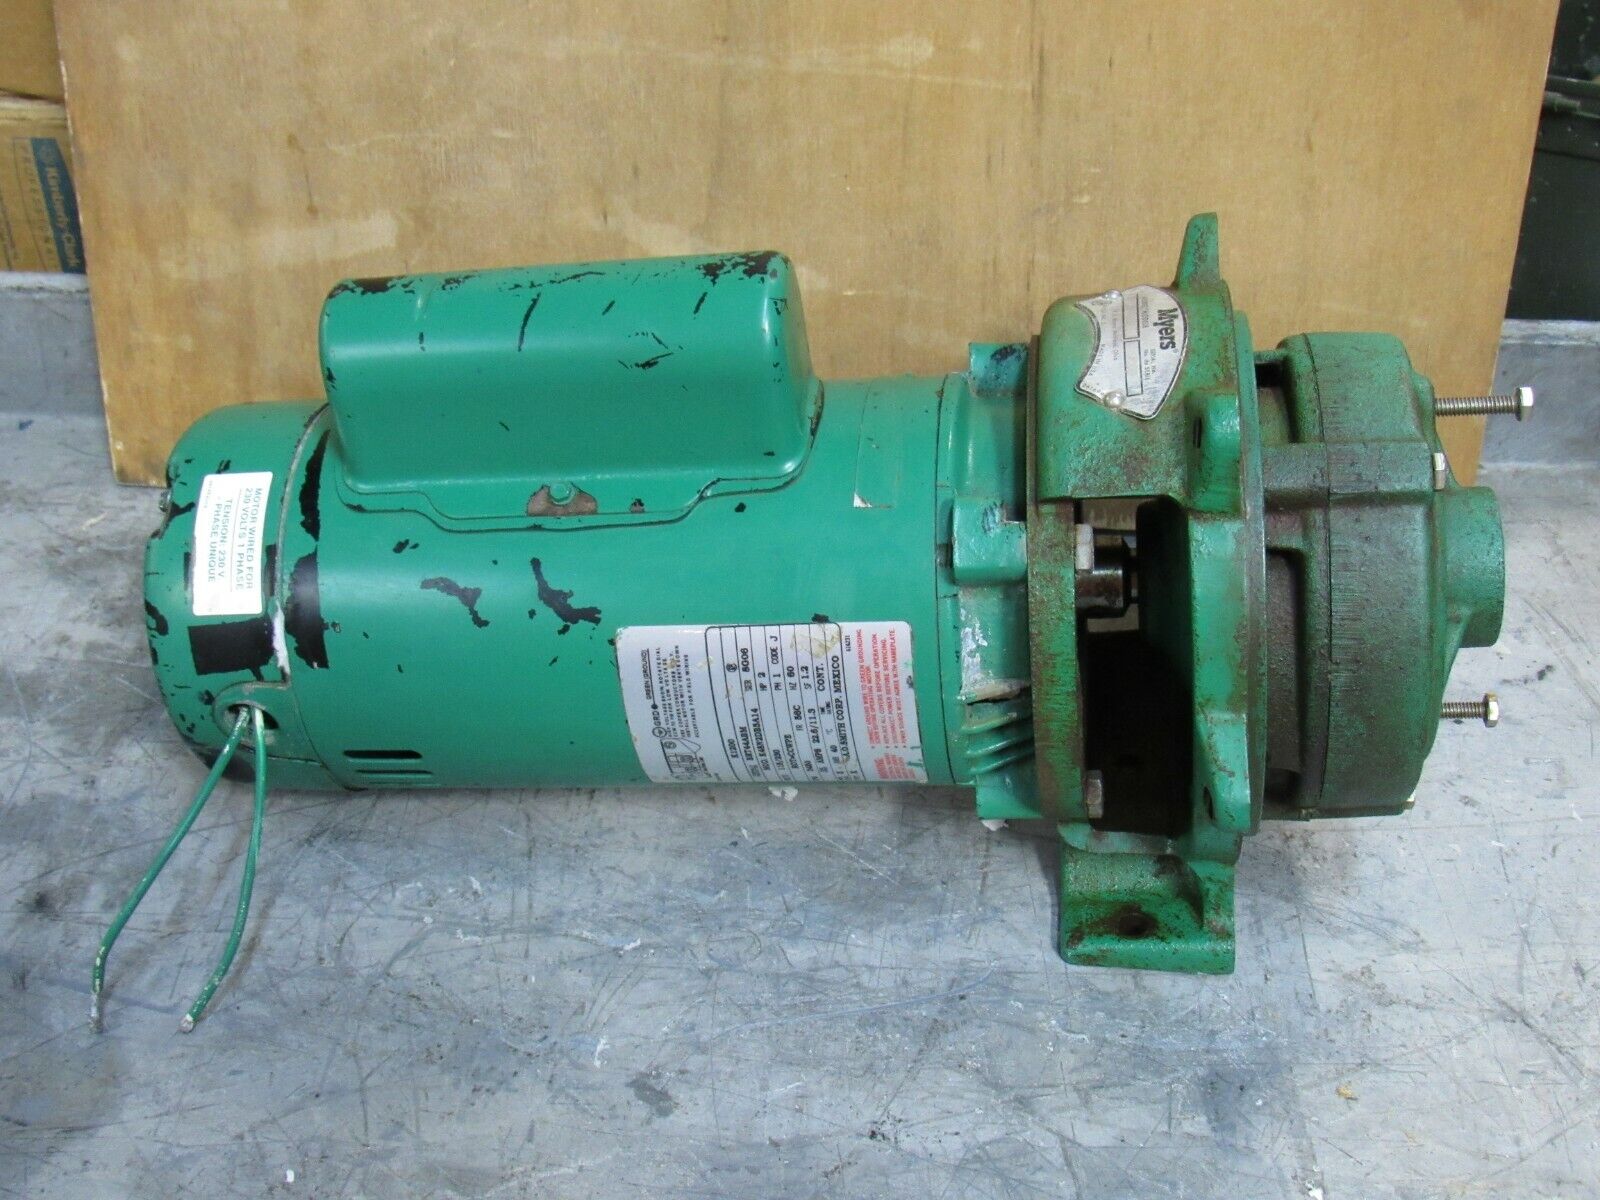 MYERS TWO STAGE 5 ☆ popular CENTRIFUGAL PUMP 2C200 1PH 3450RPM 230V Product 2HP 115